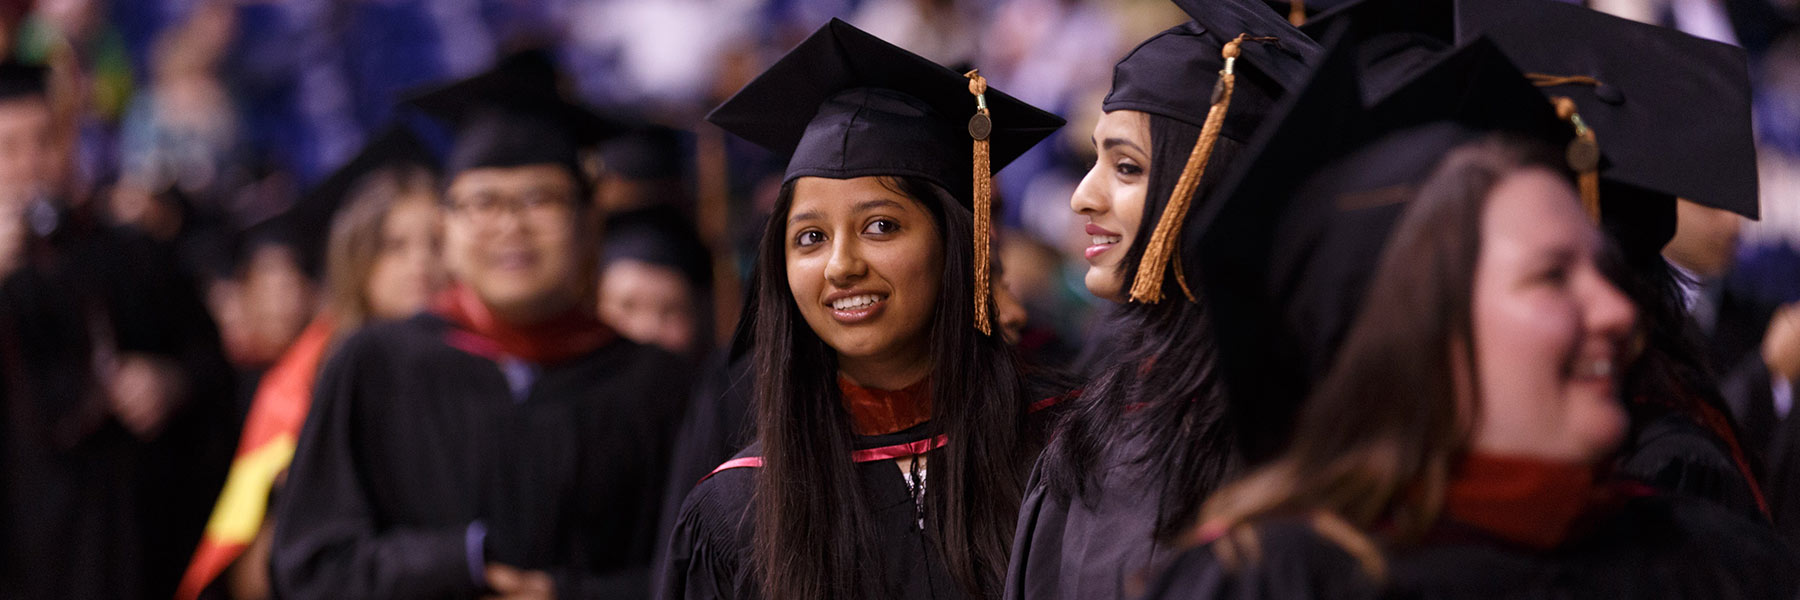 A line of graduates proceed in to the Commencement ceremony; one female leans out to look ahead